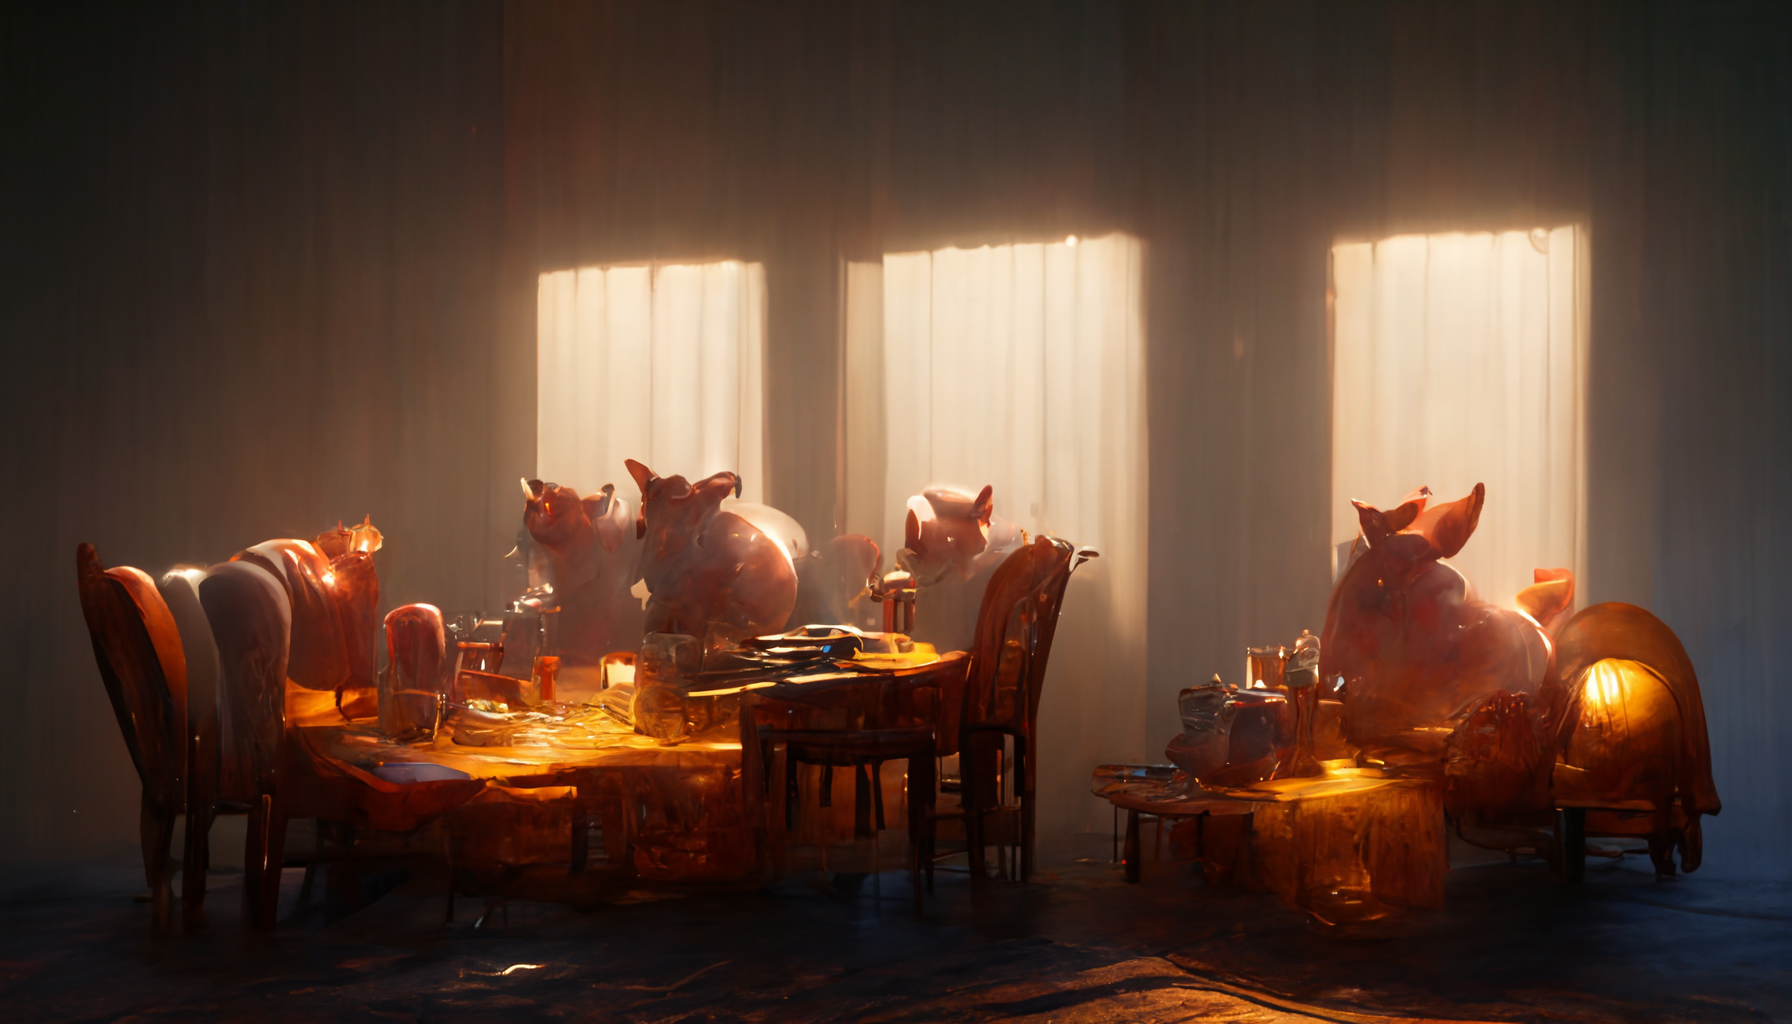 Displaying a file named Grunderwear_Photo_realistic_cinematic_lighting_4_pigs_sitting_i_f0d05f04-31fa-4cc3-bbfd-3cba3bca8403.png